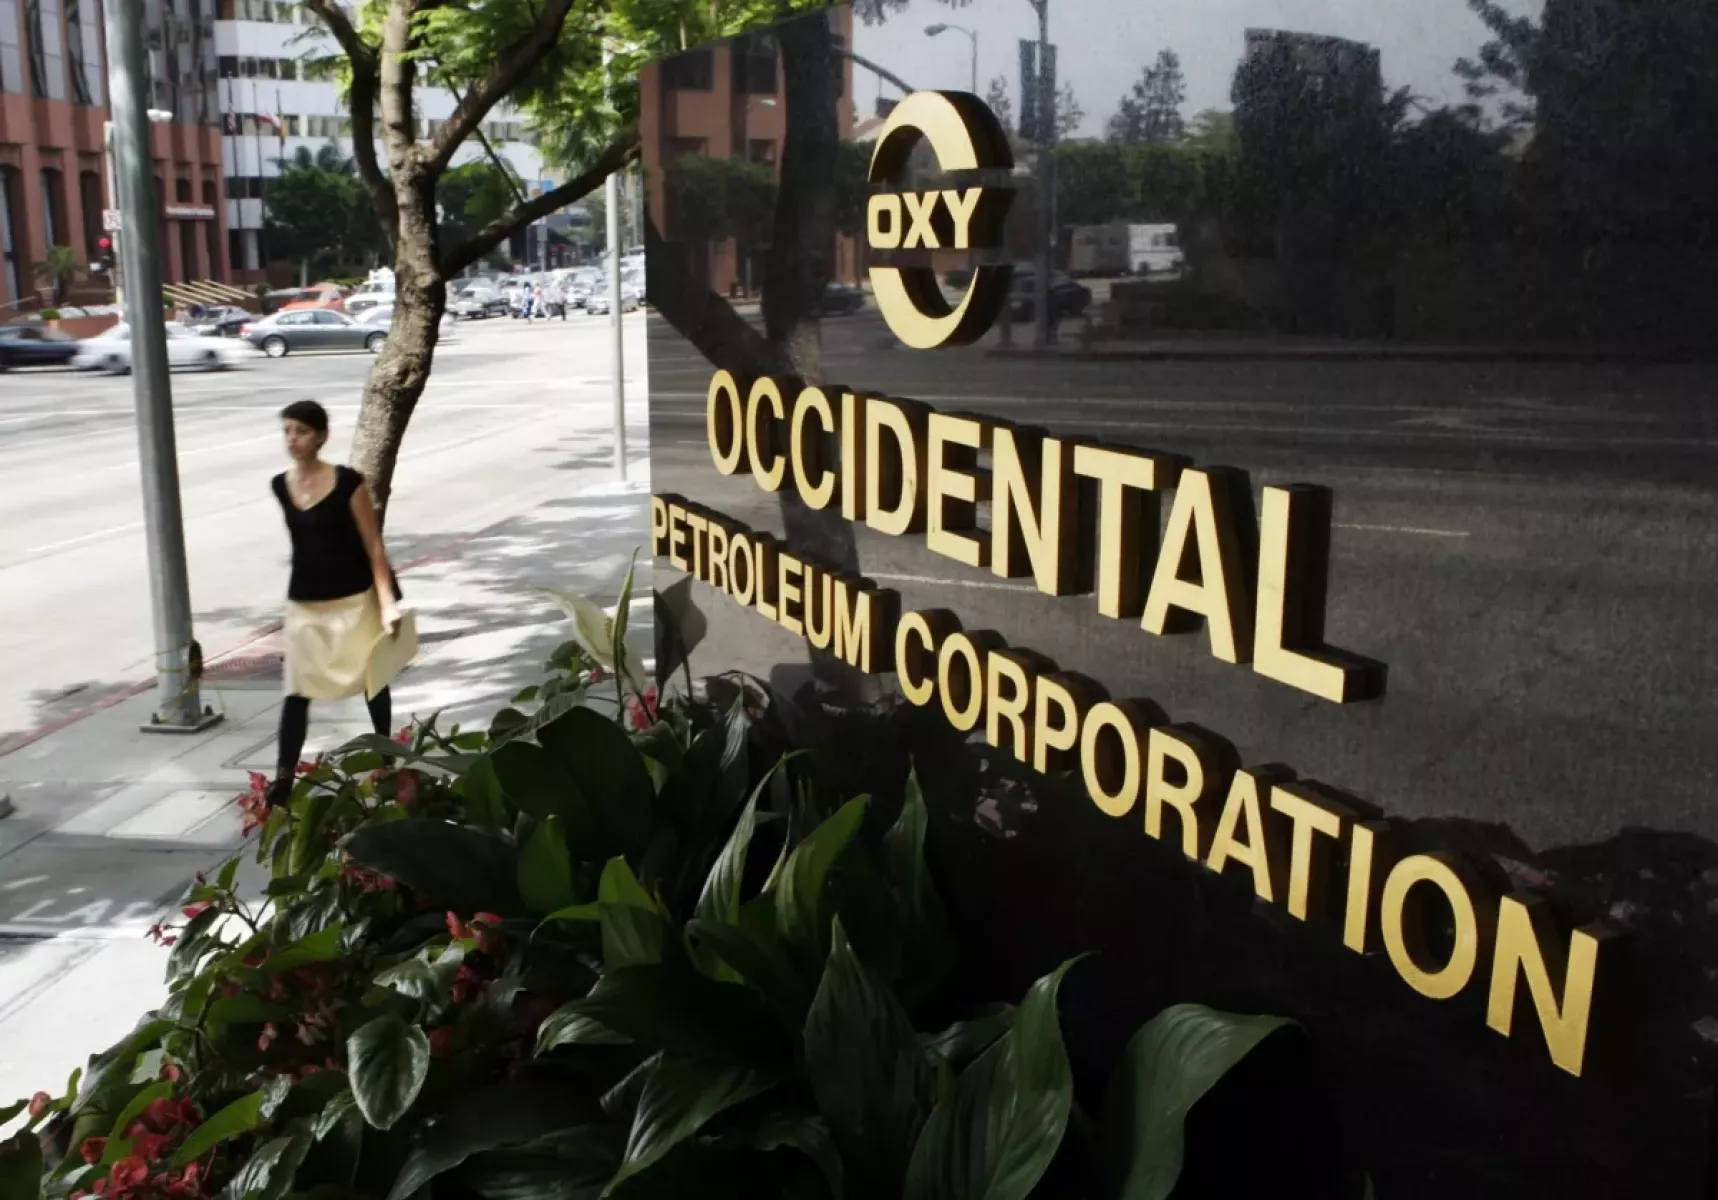 Occidental Petroleum's name and logo are on a building sign.